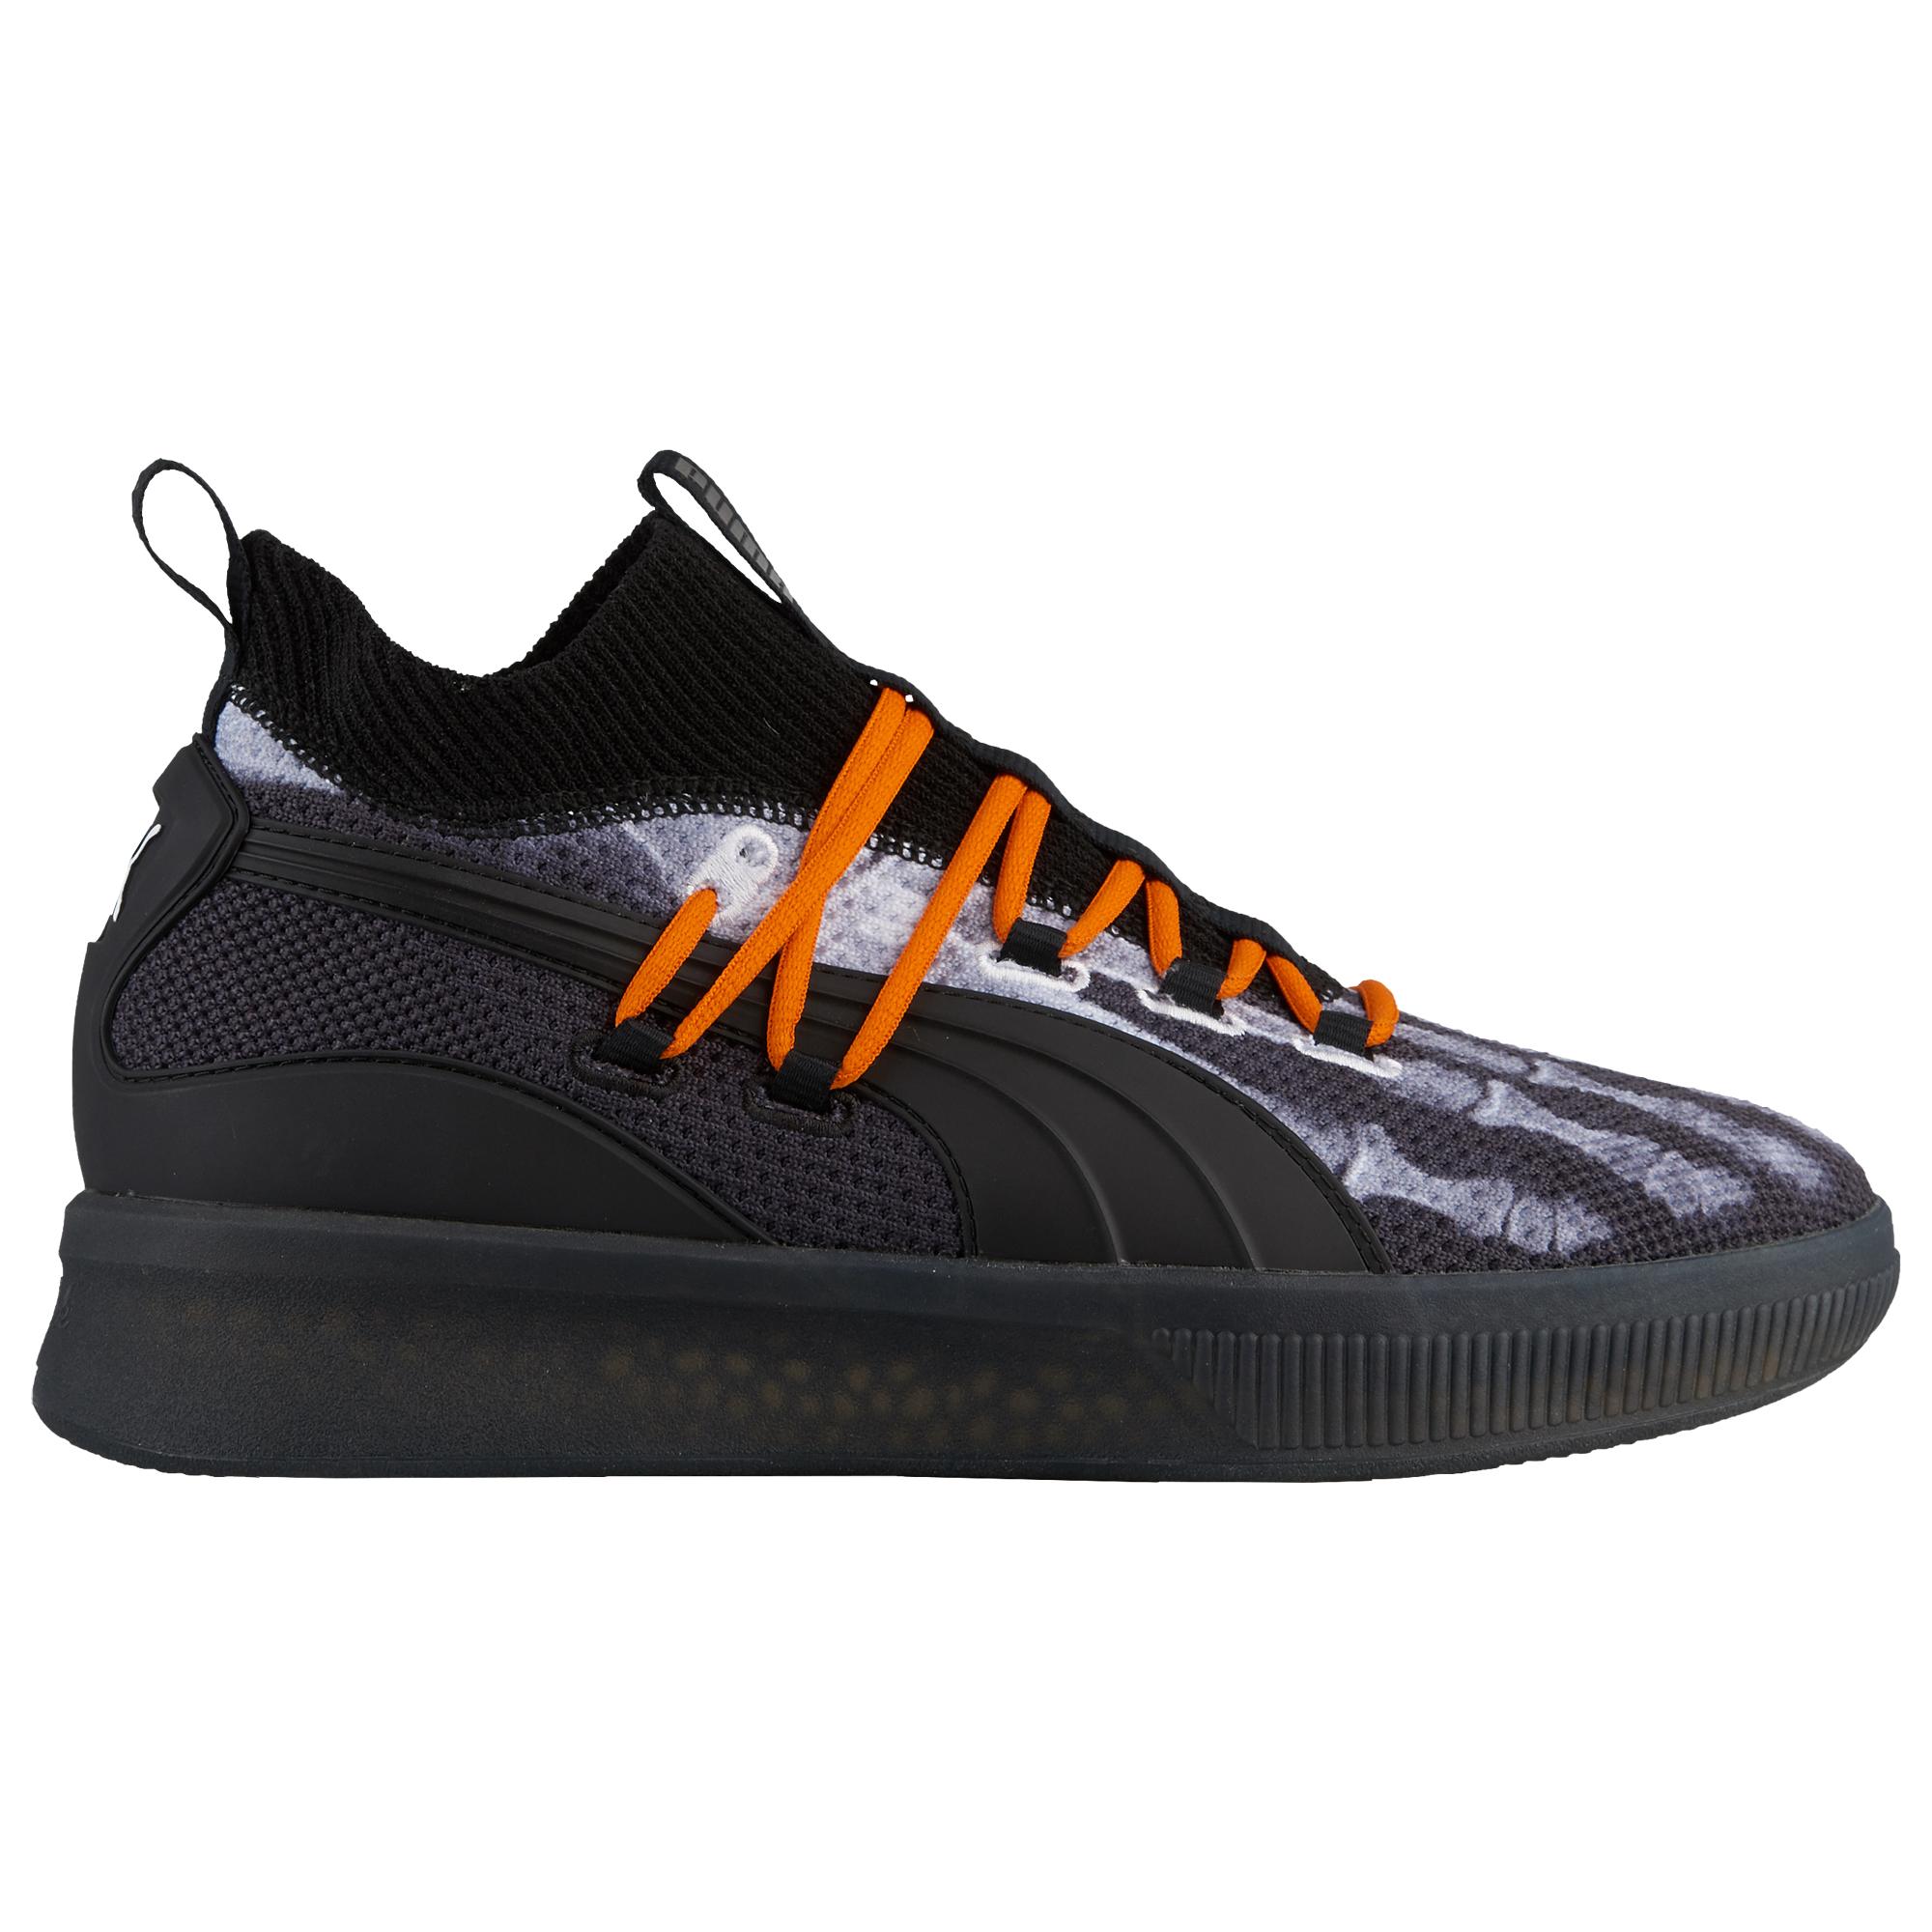 PUMA Clyde Court Basketball Shoes in Black for Men - Lyst